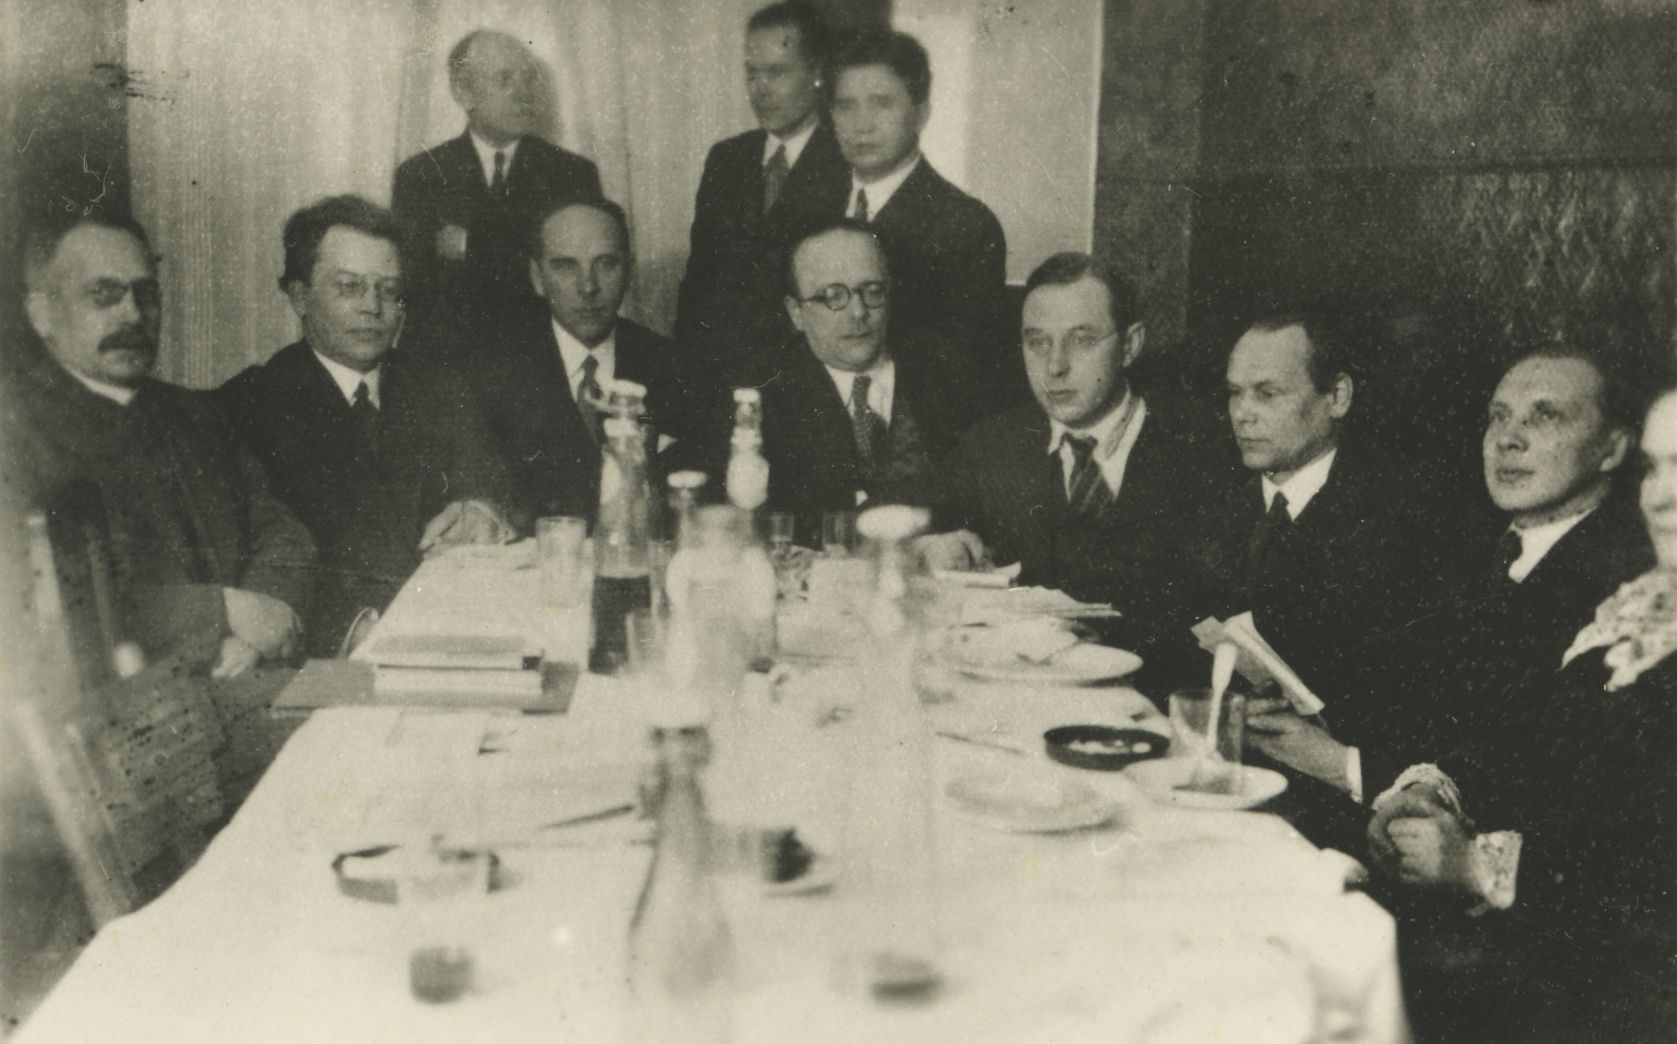 PEN Club meeting in the 1930s a.